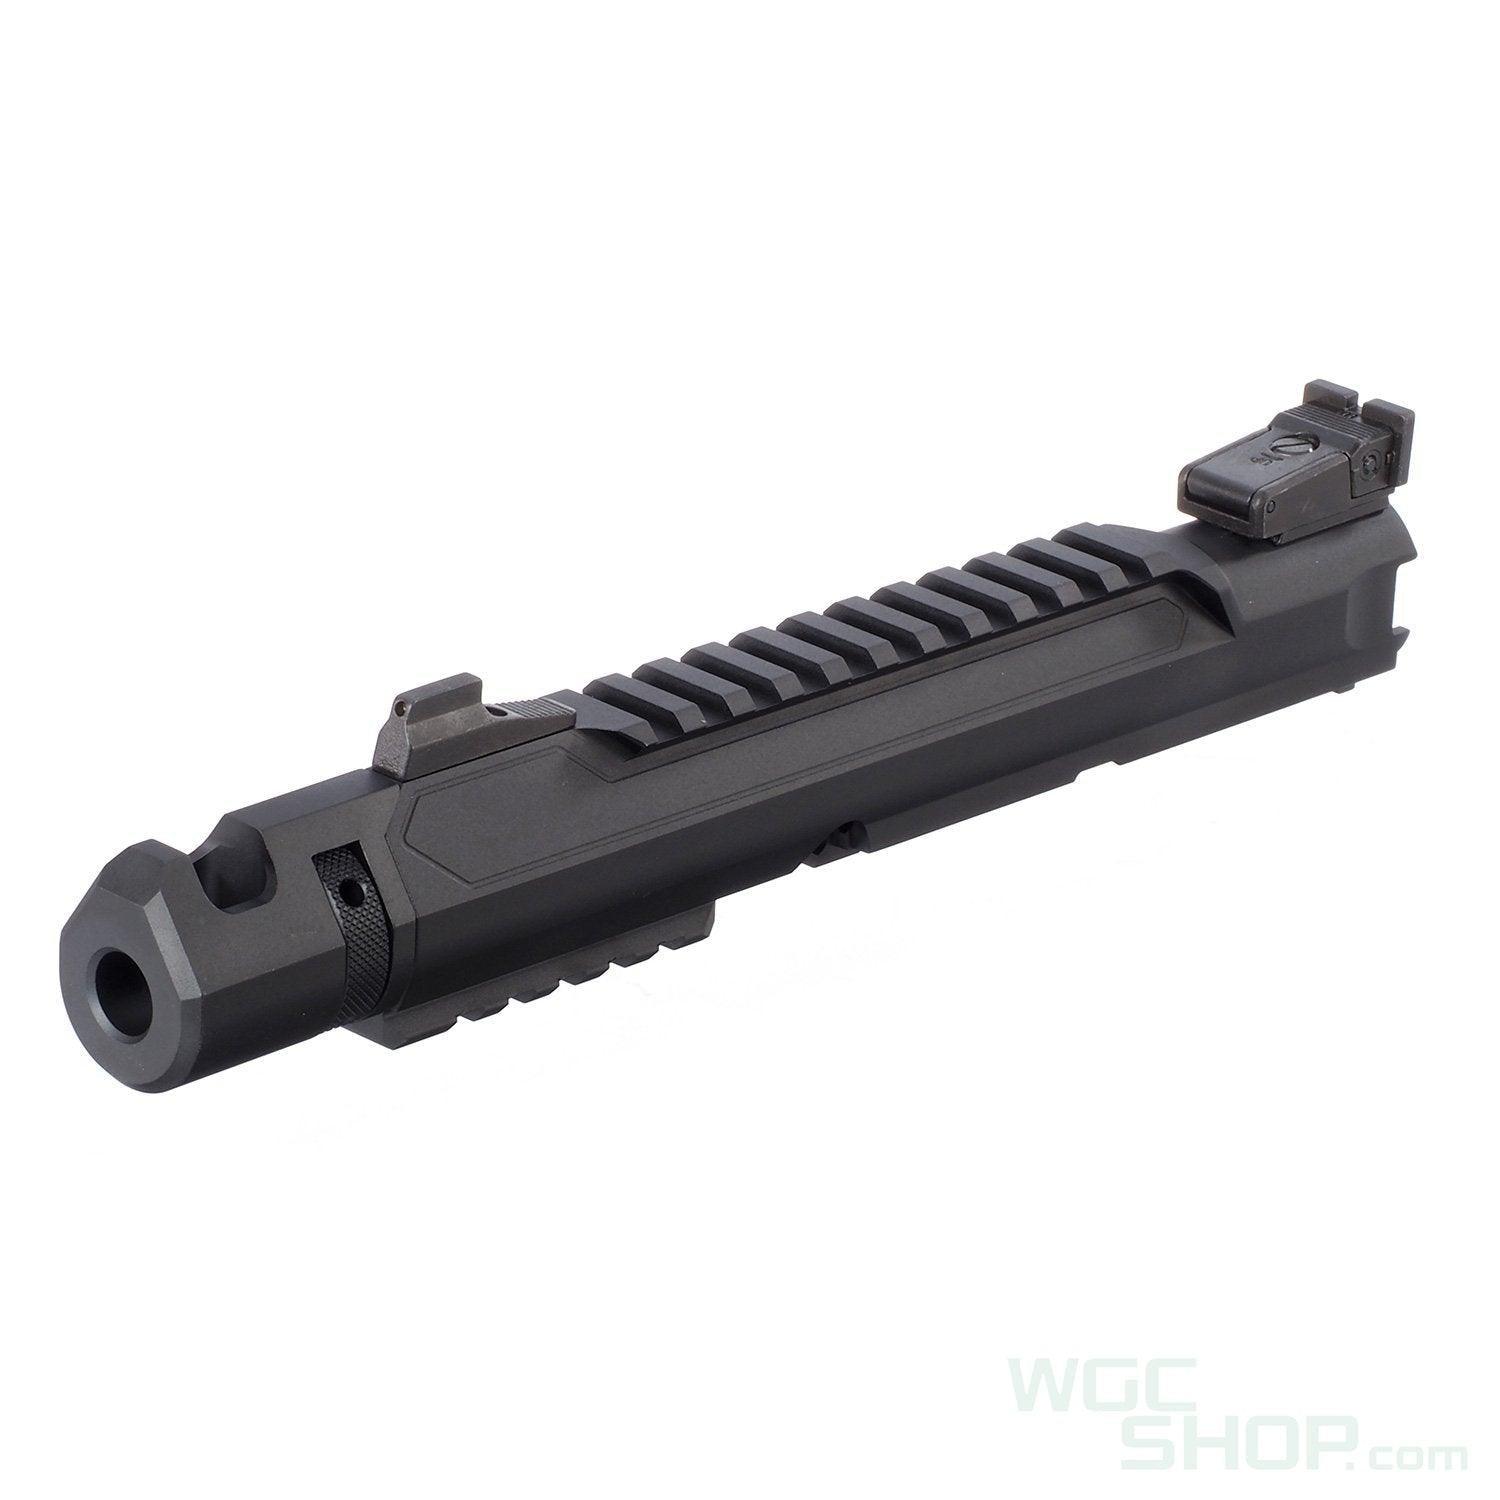 ACTION ARMY Black Mamba CNC Upper Receiver Kit B for AAP-01 GBB